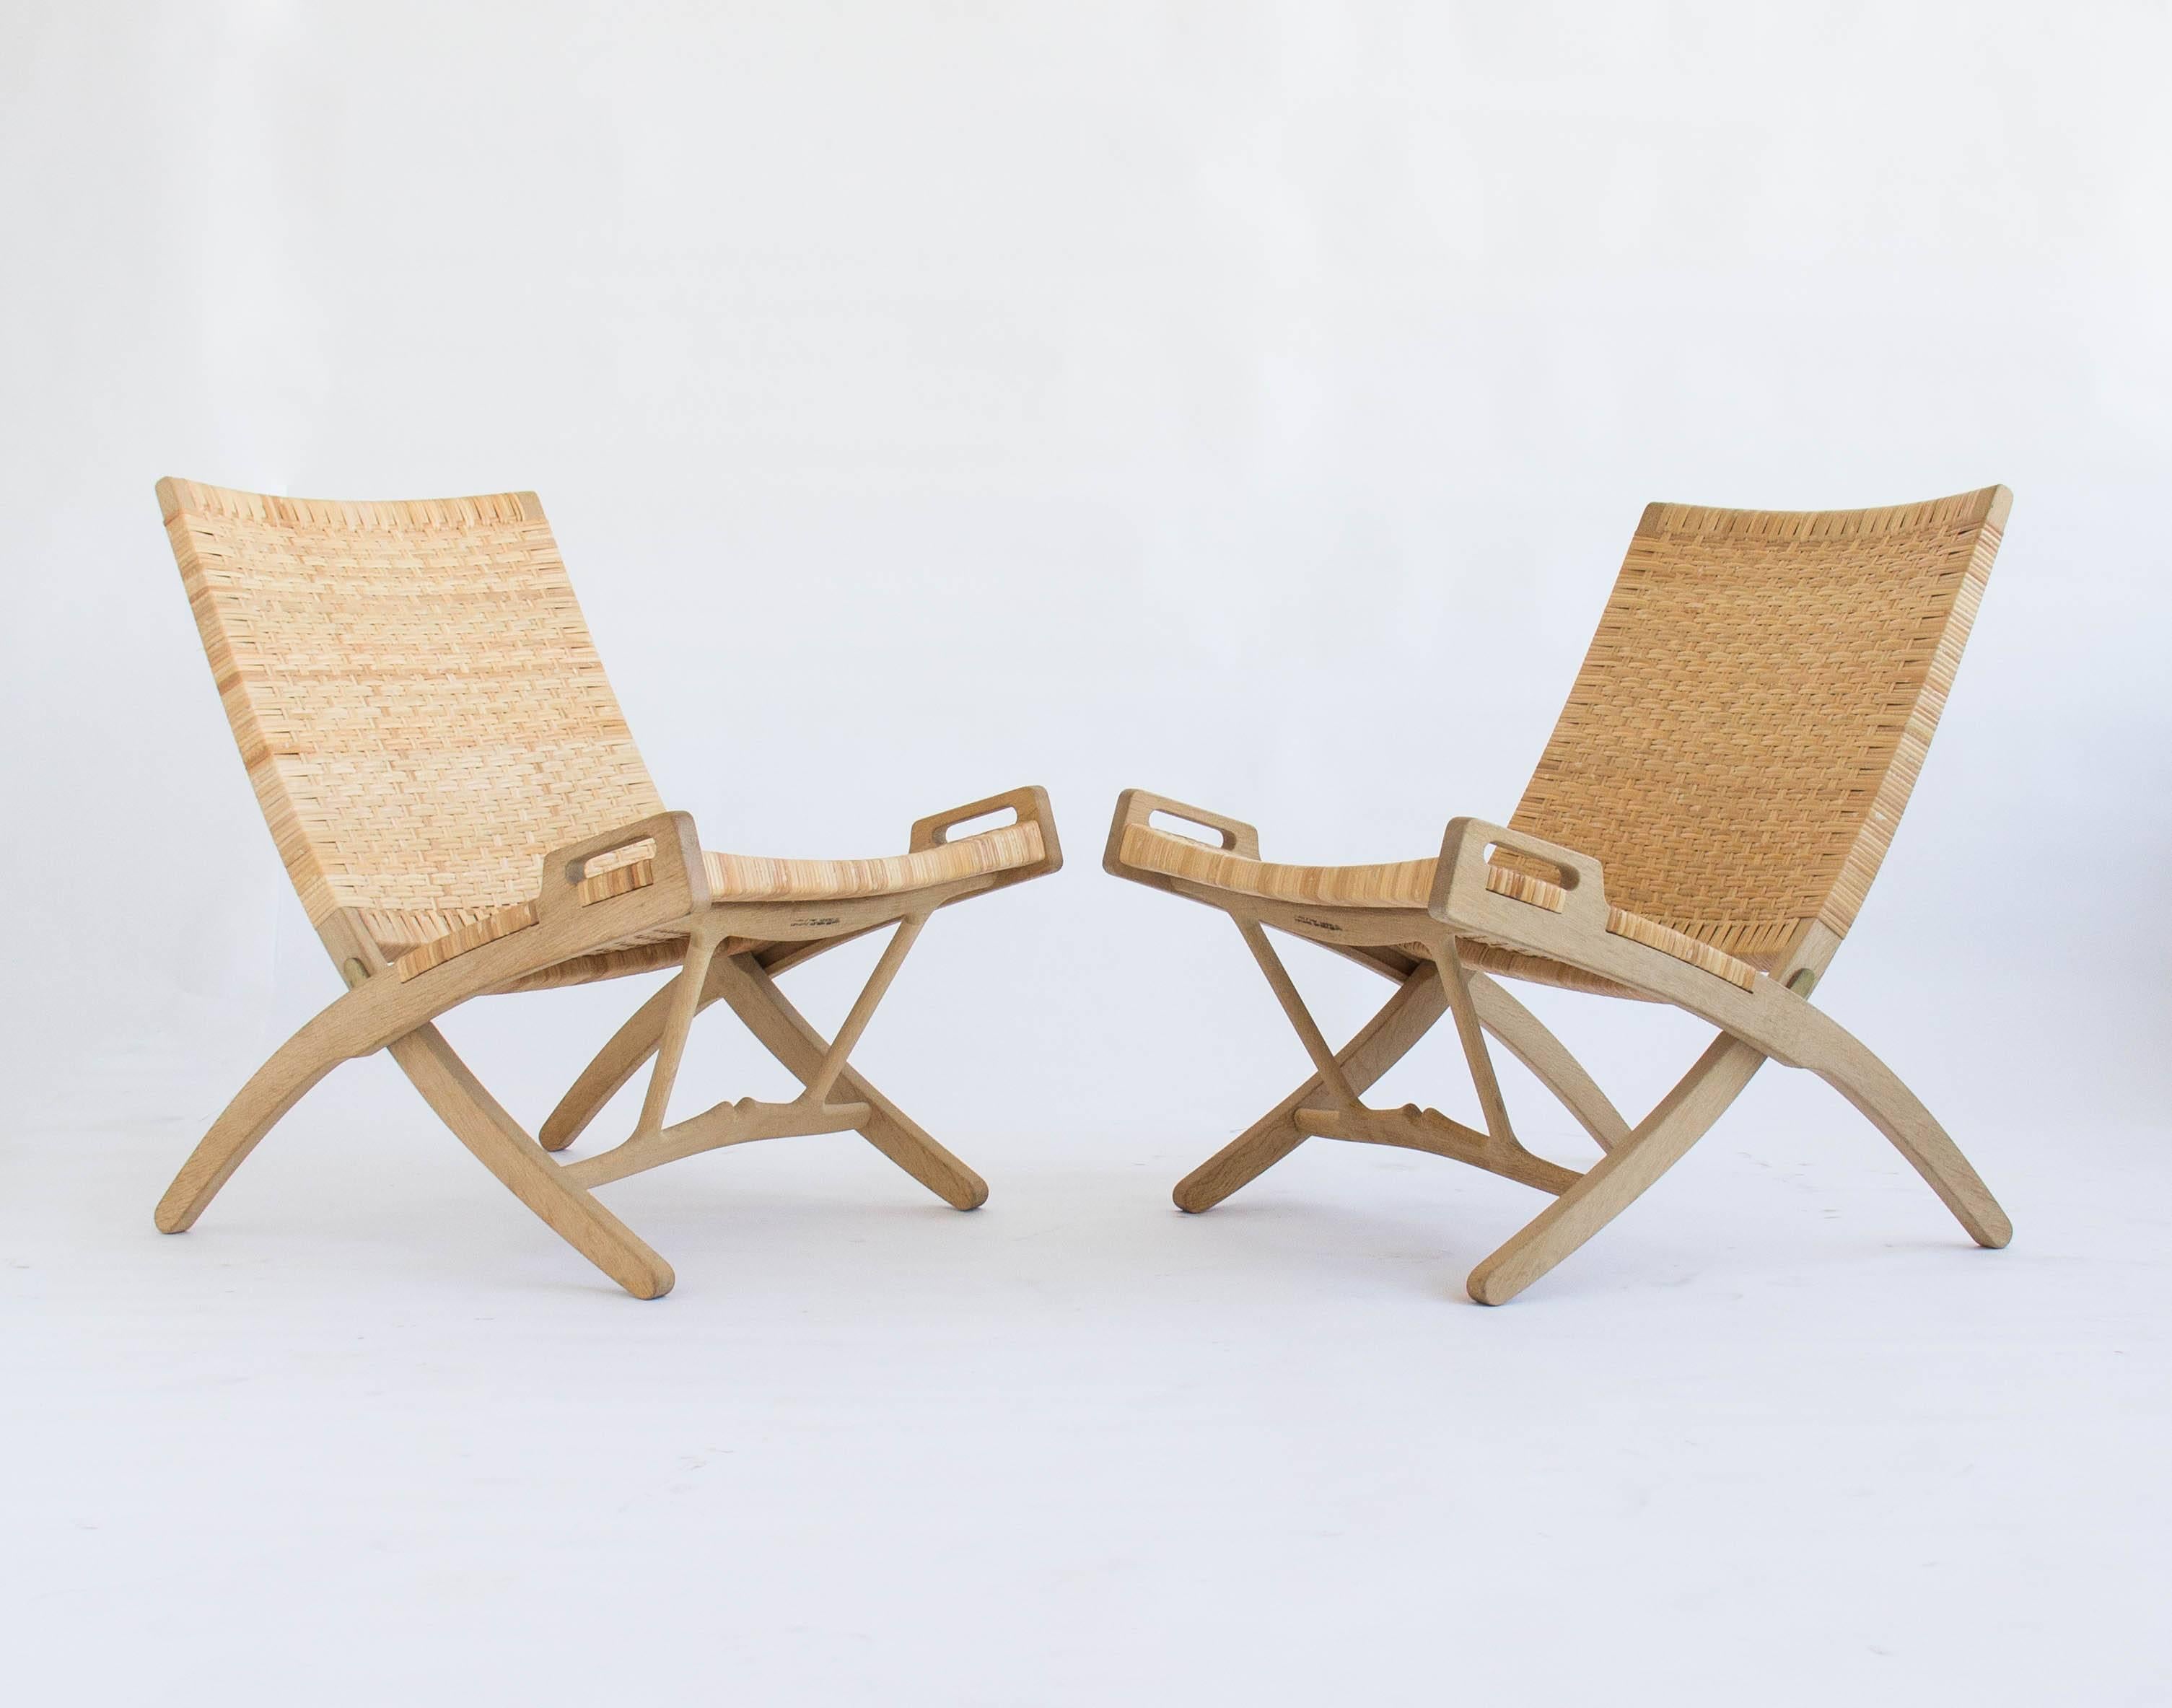 Pair of folding lounge chairs made by PP Møbler in 2007. The pair was designed by Hans Wegner in 1949. For many years this design was produced by Johannes Hansen.

Each chair includes oak wall hook so the chairs can be hung while not in